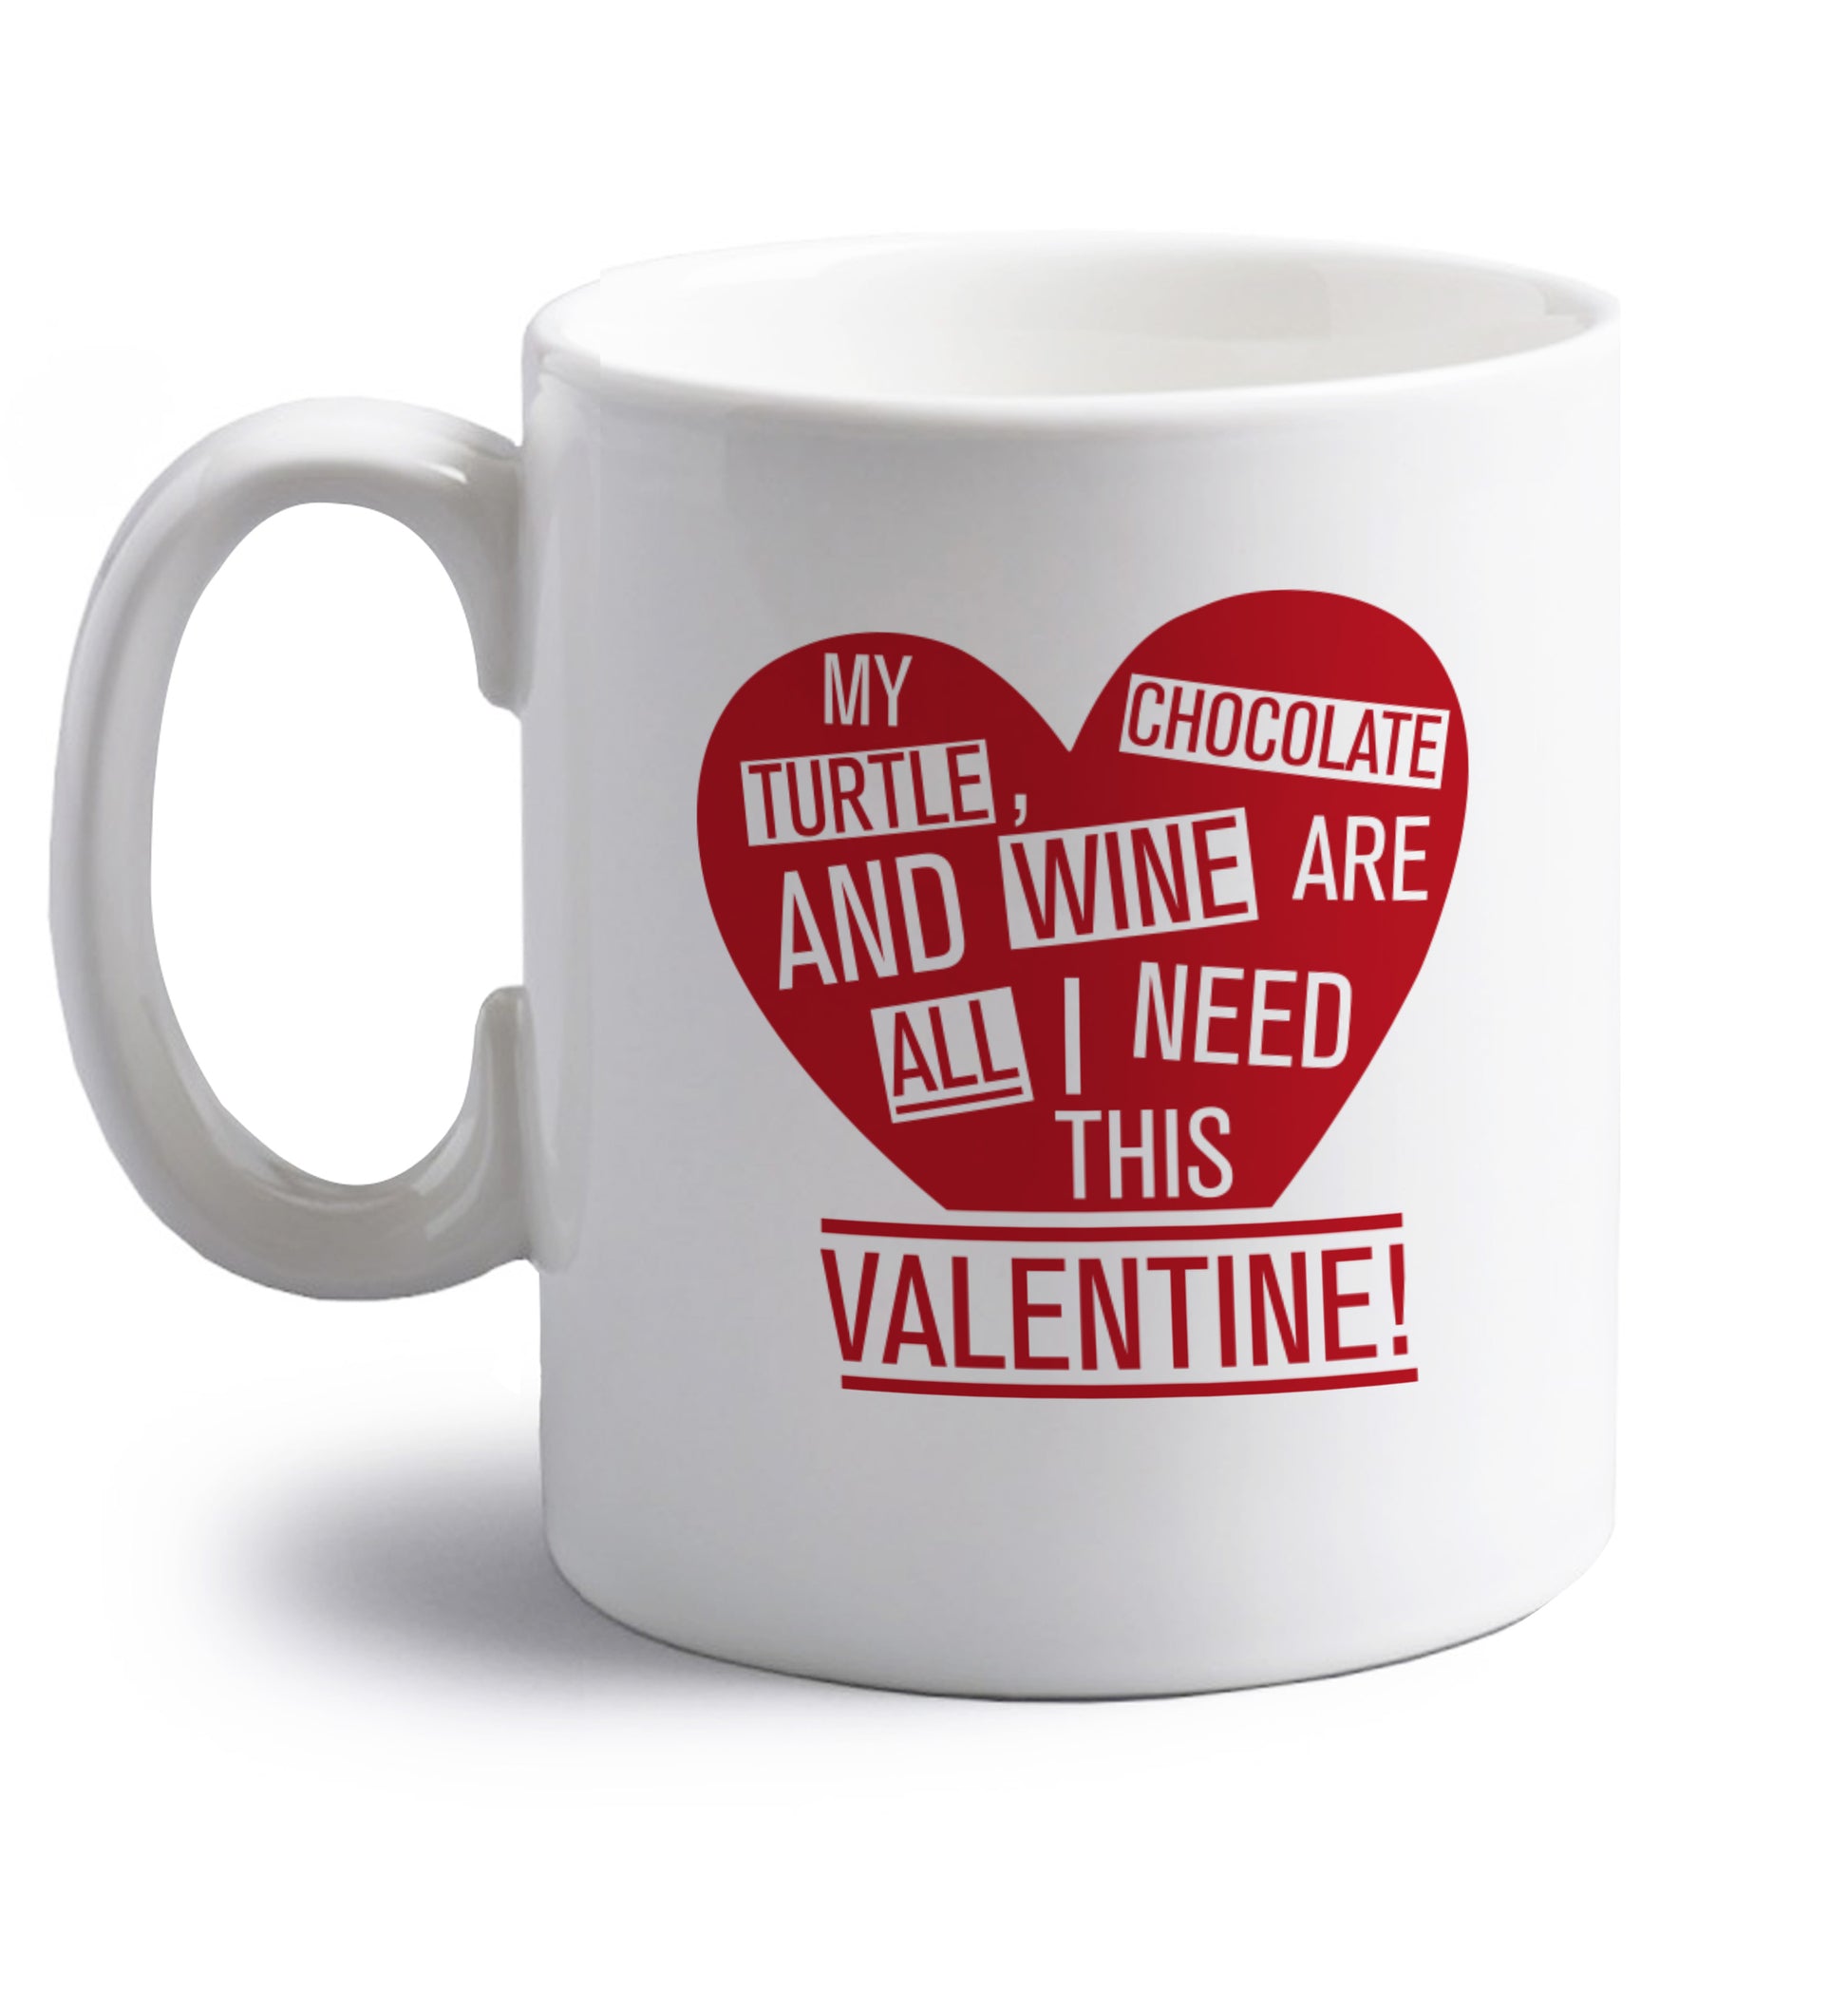 My turtle, chocolate and wine are all I need this valentine! right handed white ceramic mug 